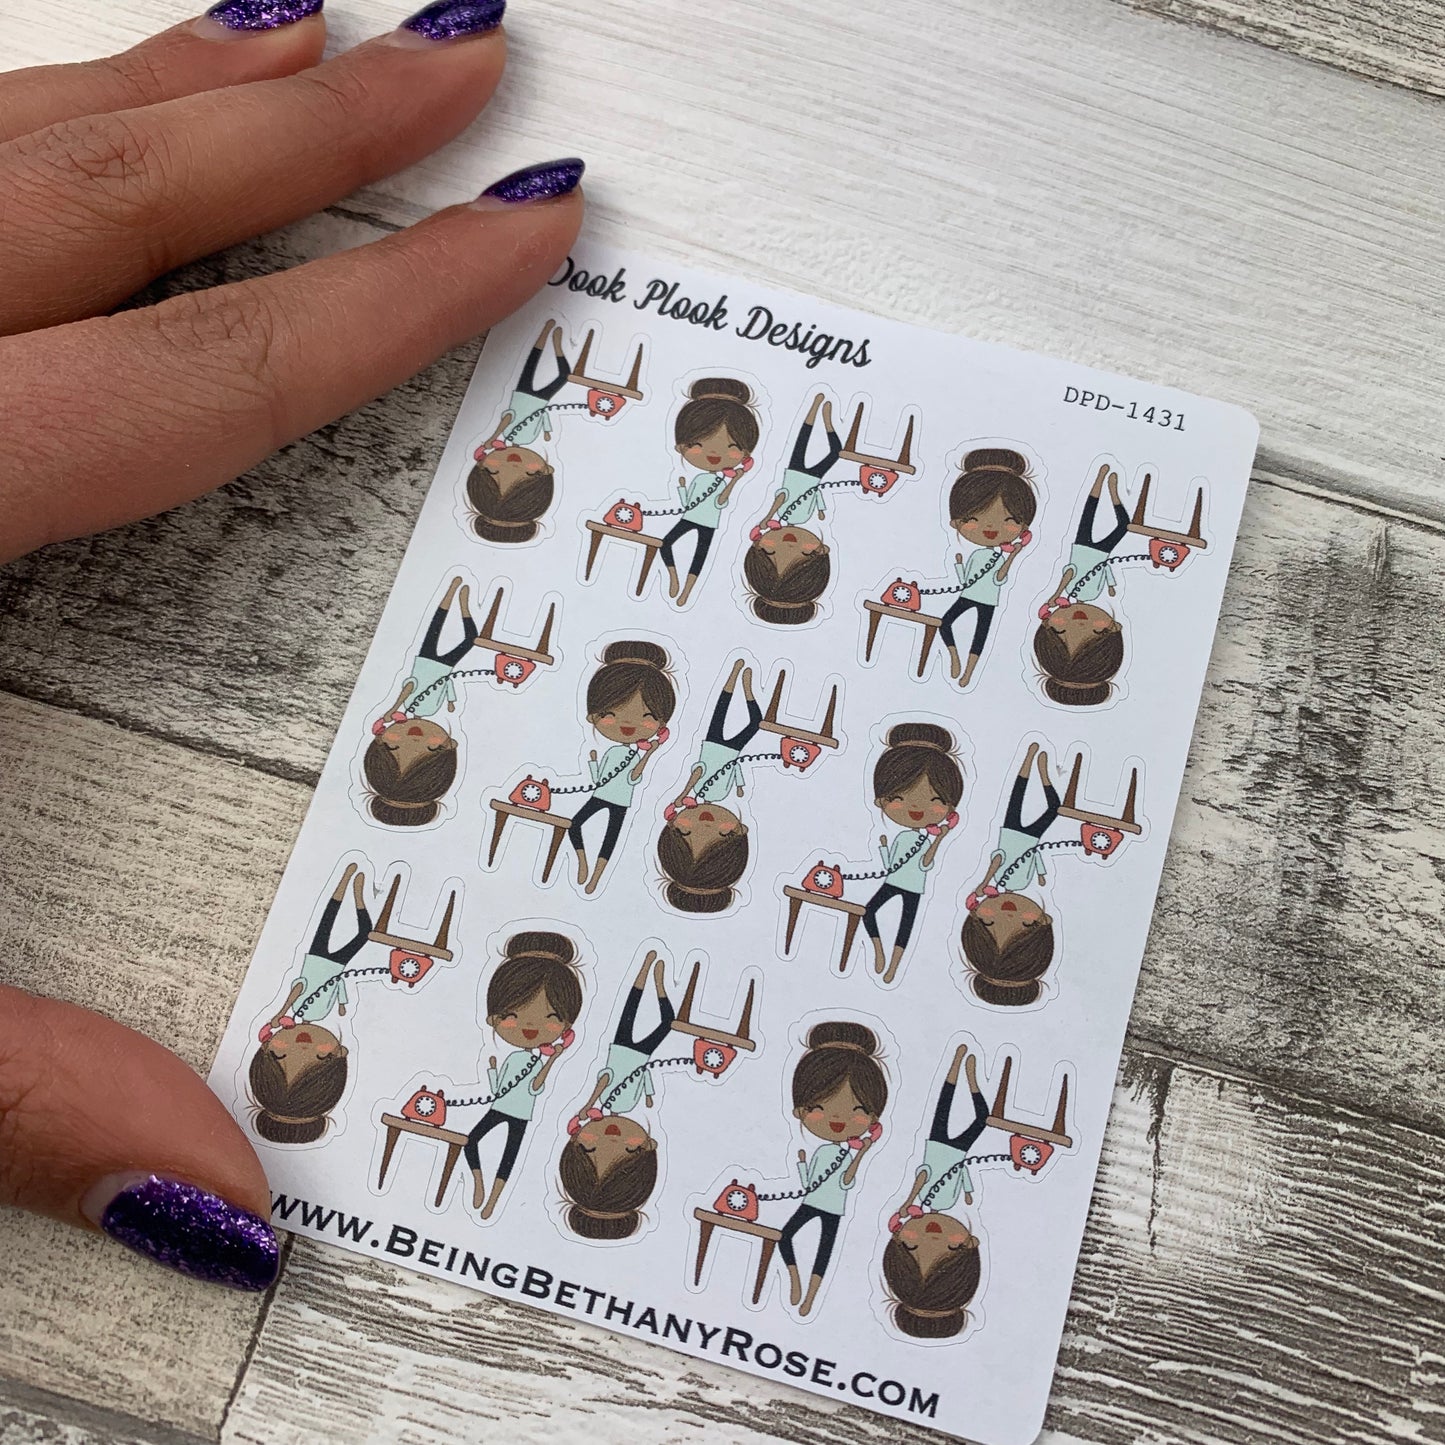 Black Woman - Phone Stickers (DPD1431)